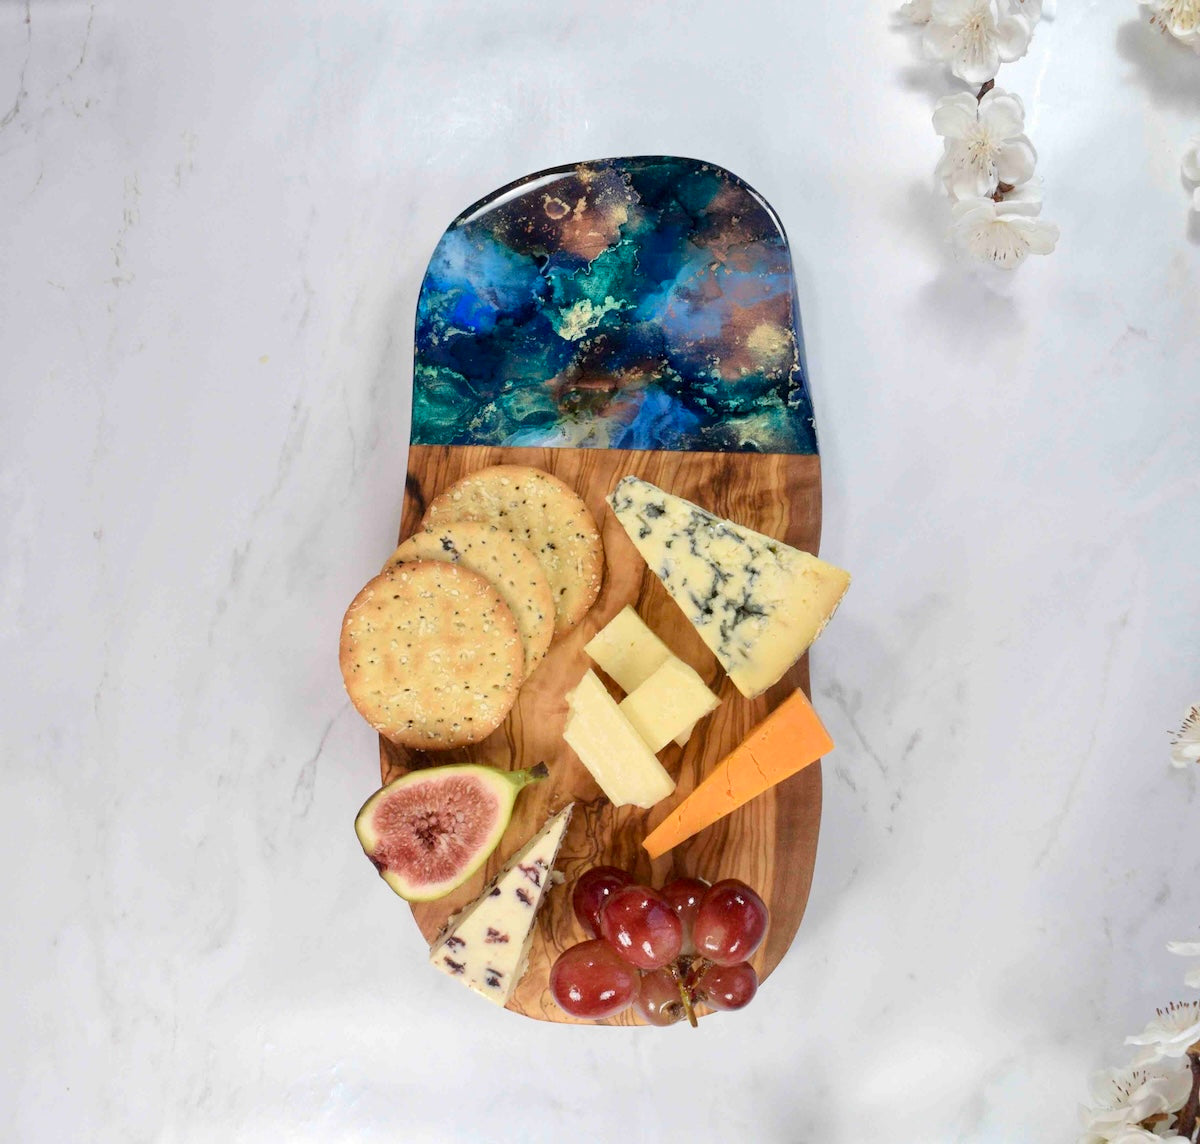 Rounded Rustic Olive Wood Cutting Board 30cm - blue gold bronze kitchen decor - cheese lover gift ideas - Kate Chesters Art - charcuterie tapas serving board